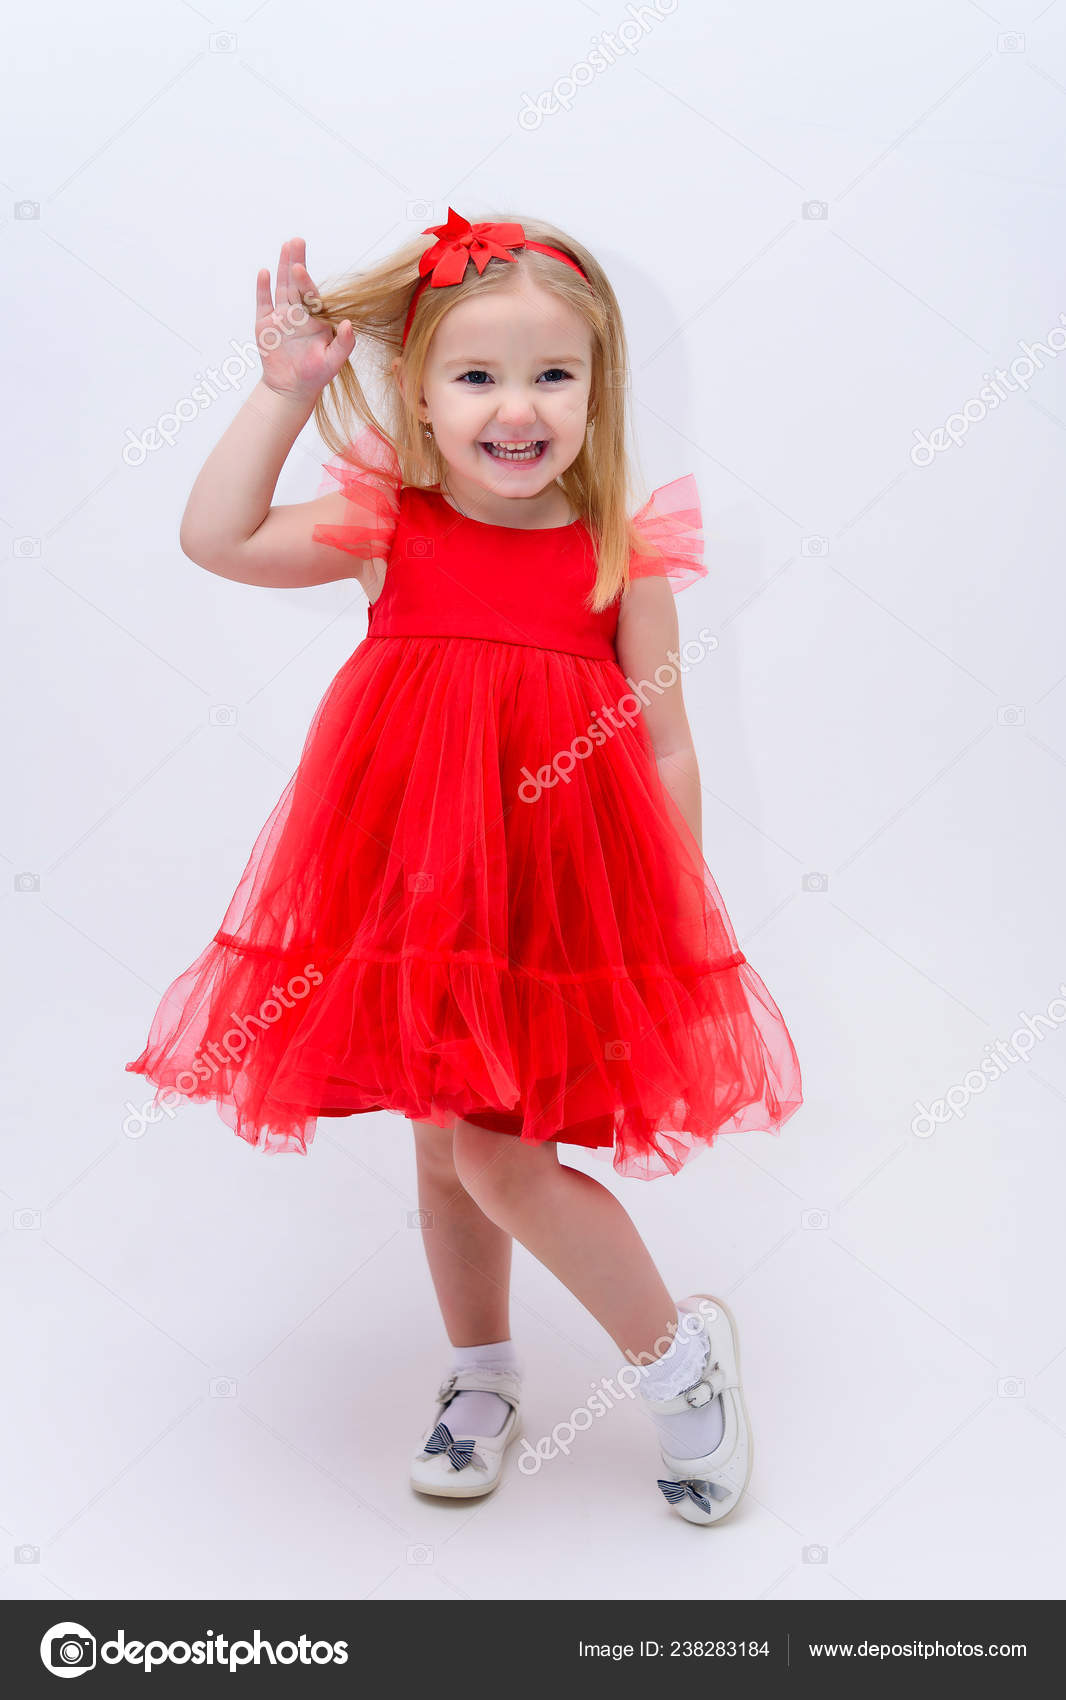 Cute baby or toddler poses set Royalty Free Vector Image